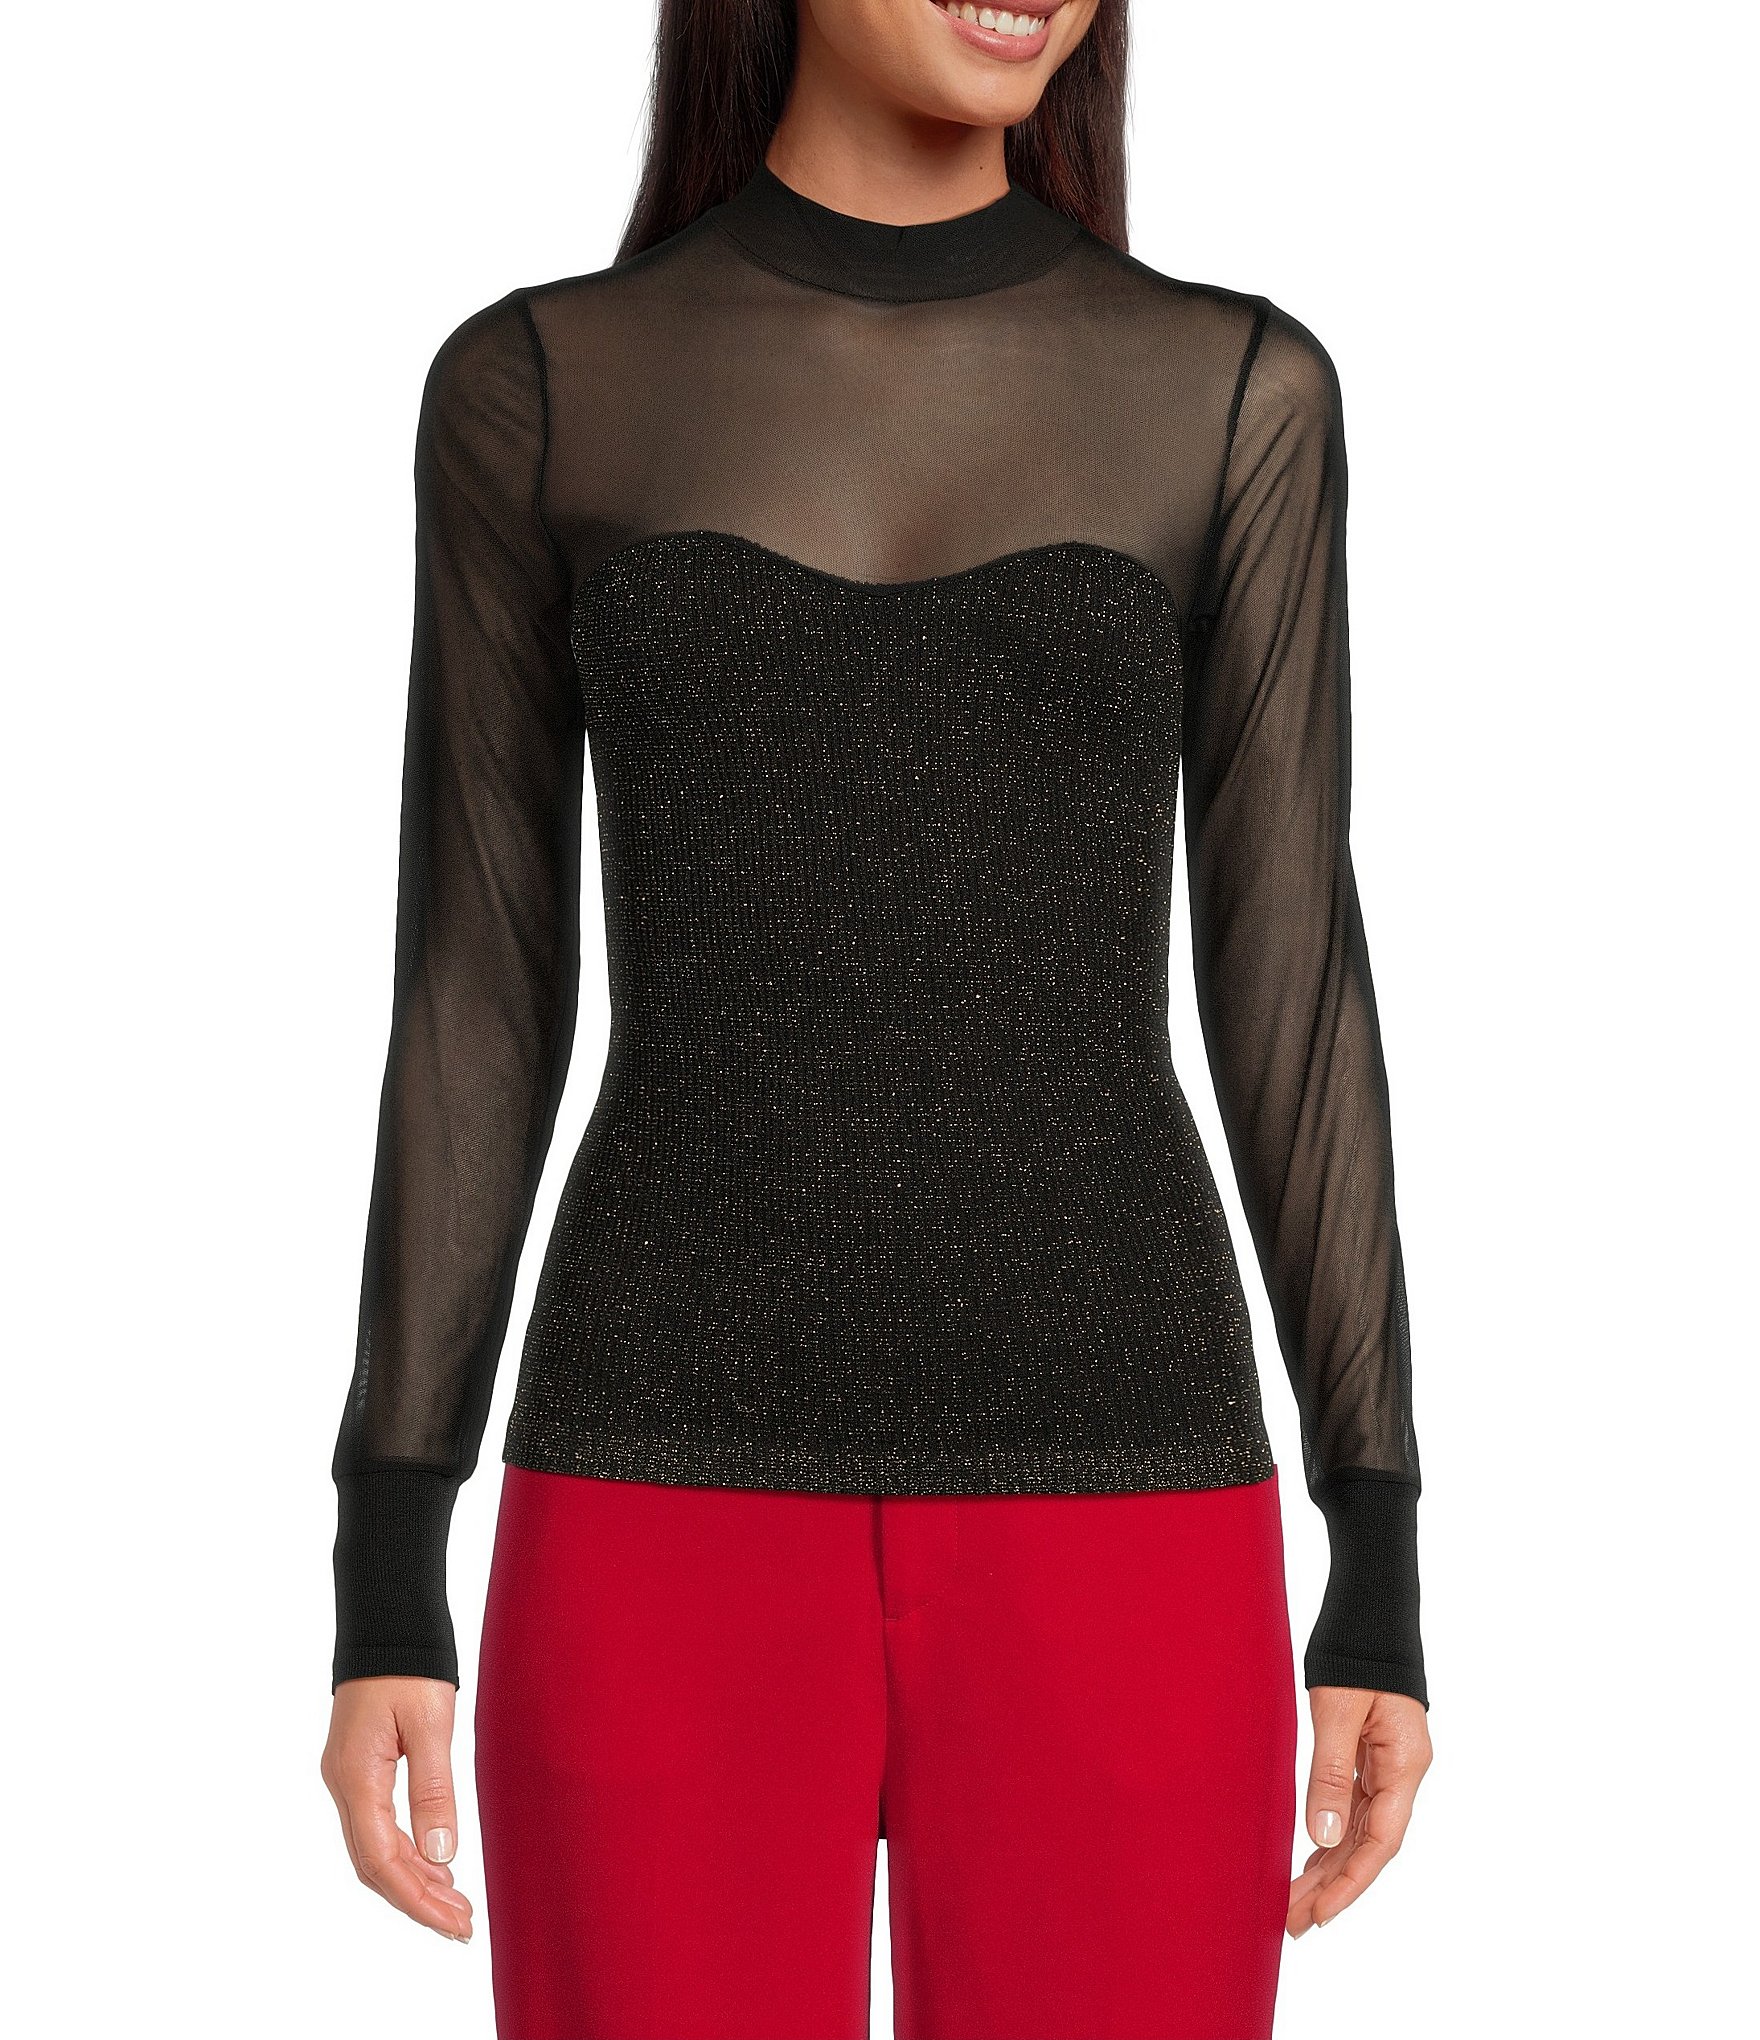 A Loves A Knit Mock Neck Illusion Mesh Sparkle Long Sleeve Top